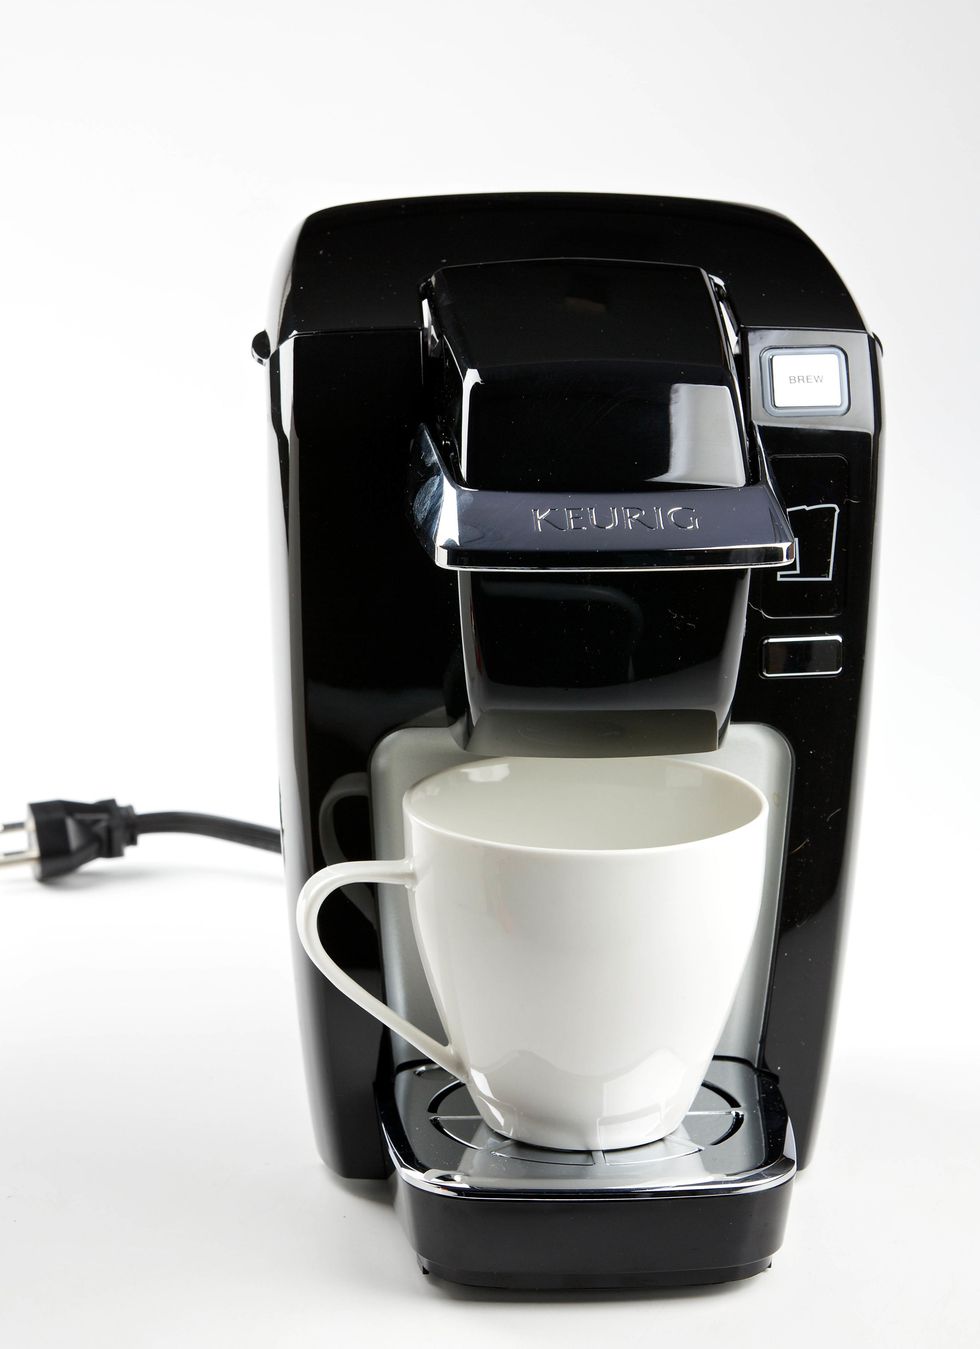 I Tested Keurig K Compact - Here's Everything You Need To Know